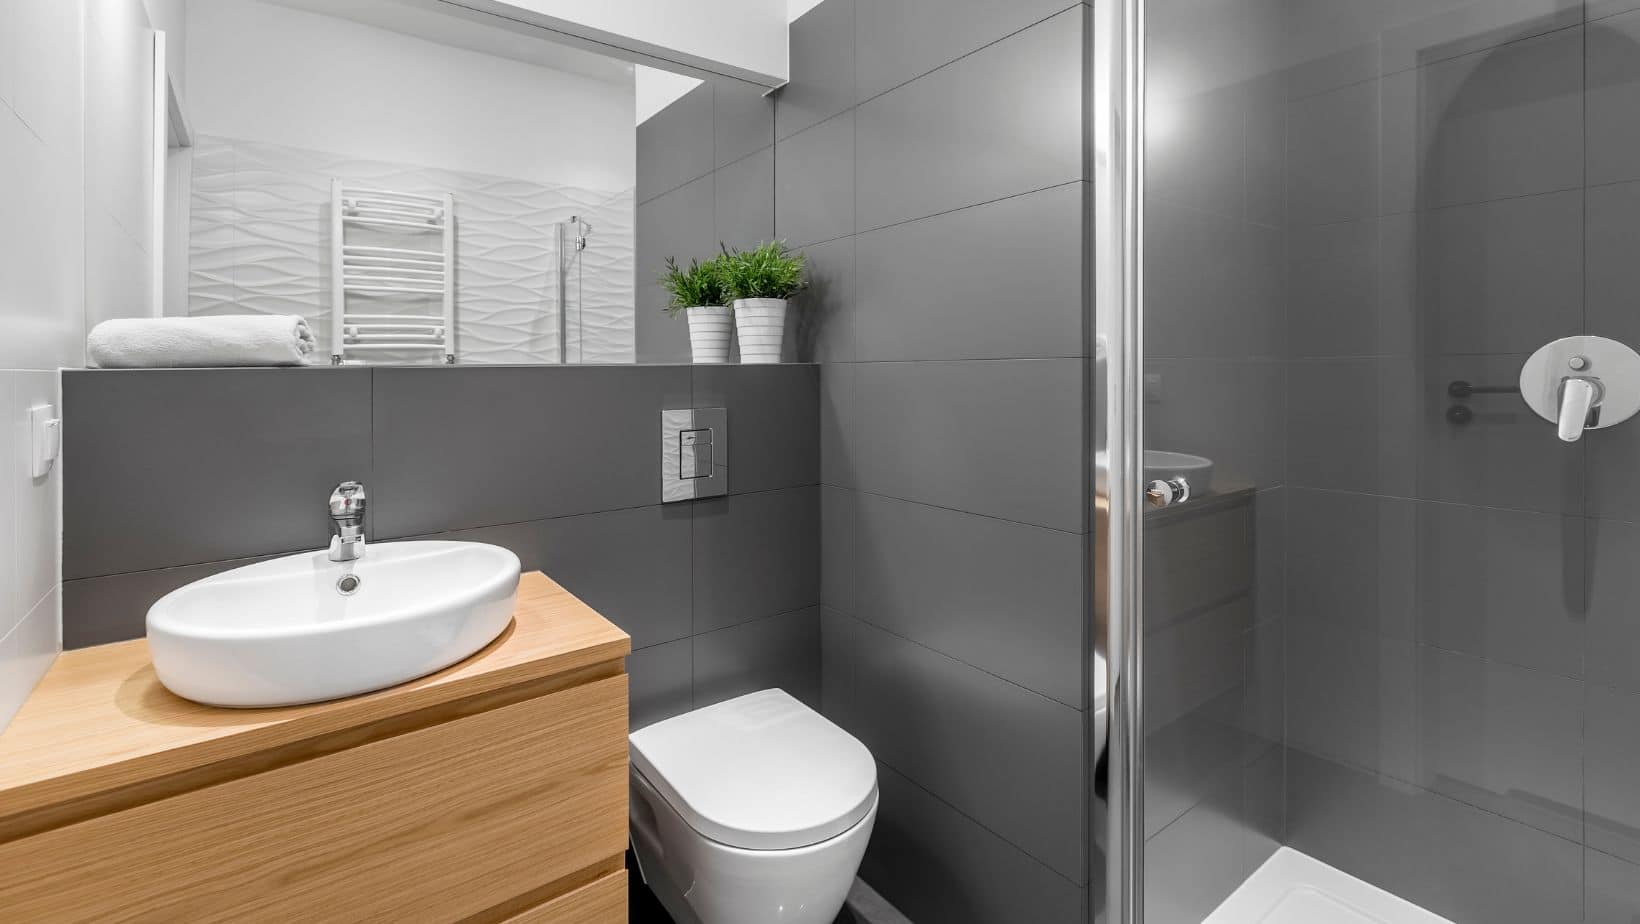 Small modern grey bathroom with wood bathroom cabinet, toilet, and shower